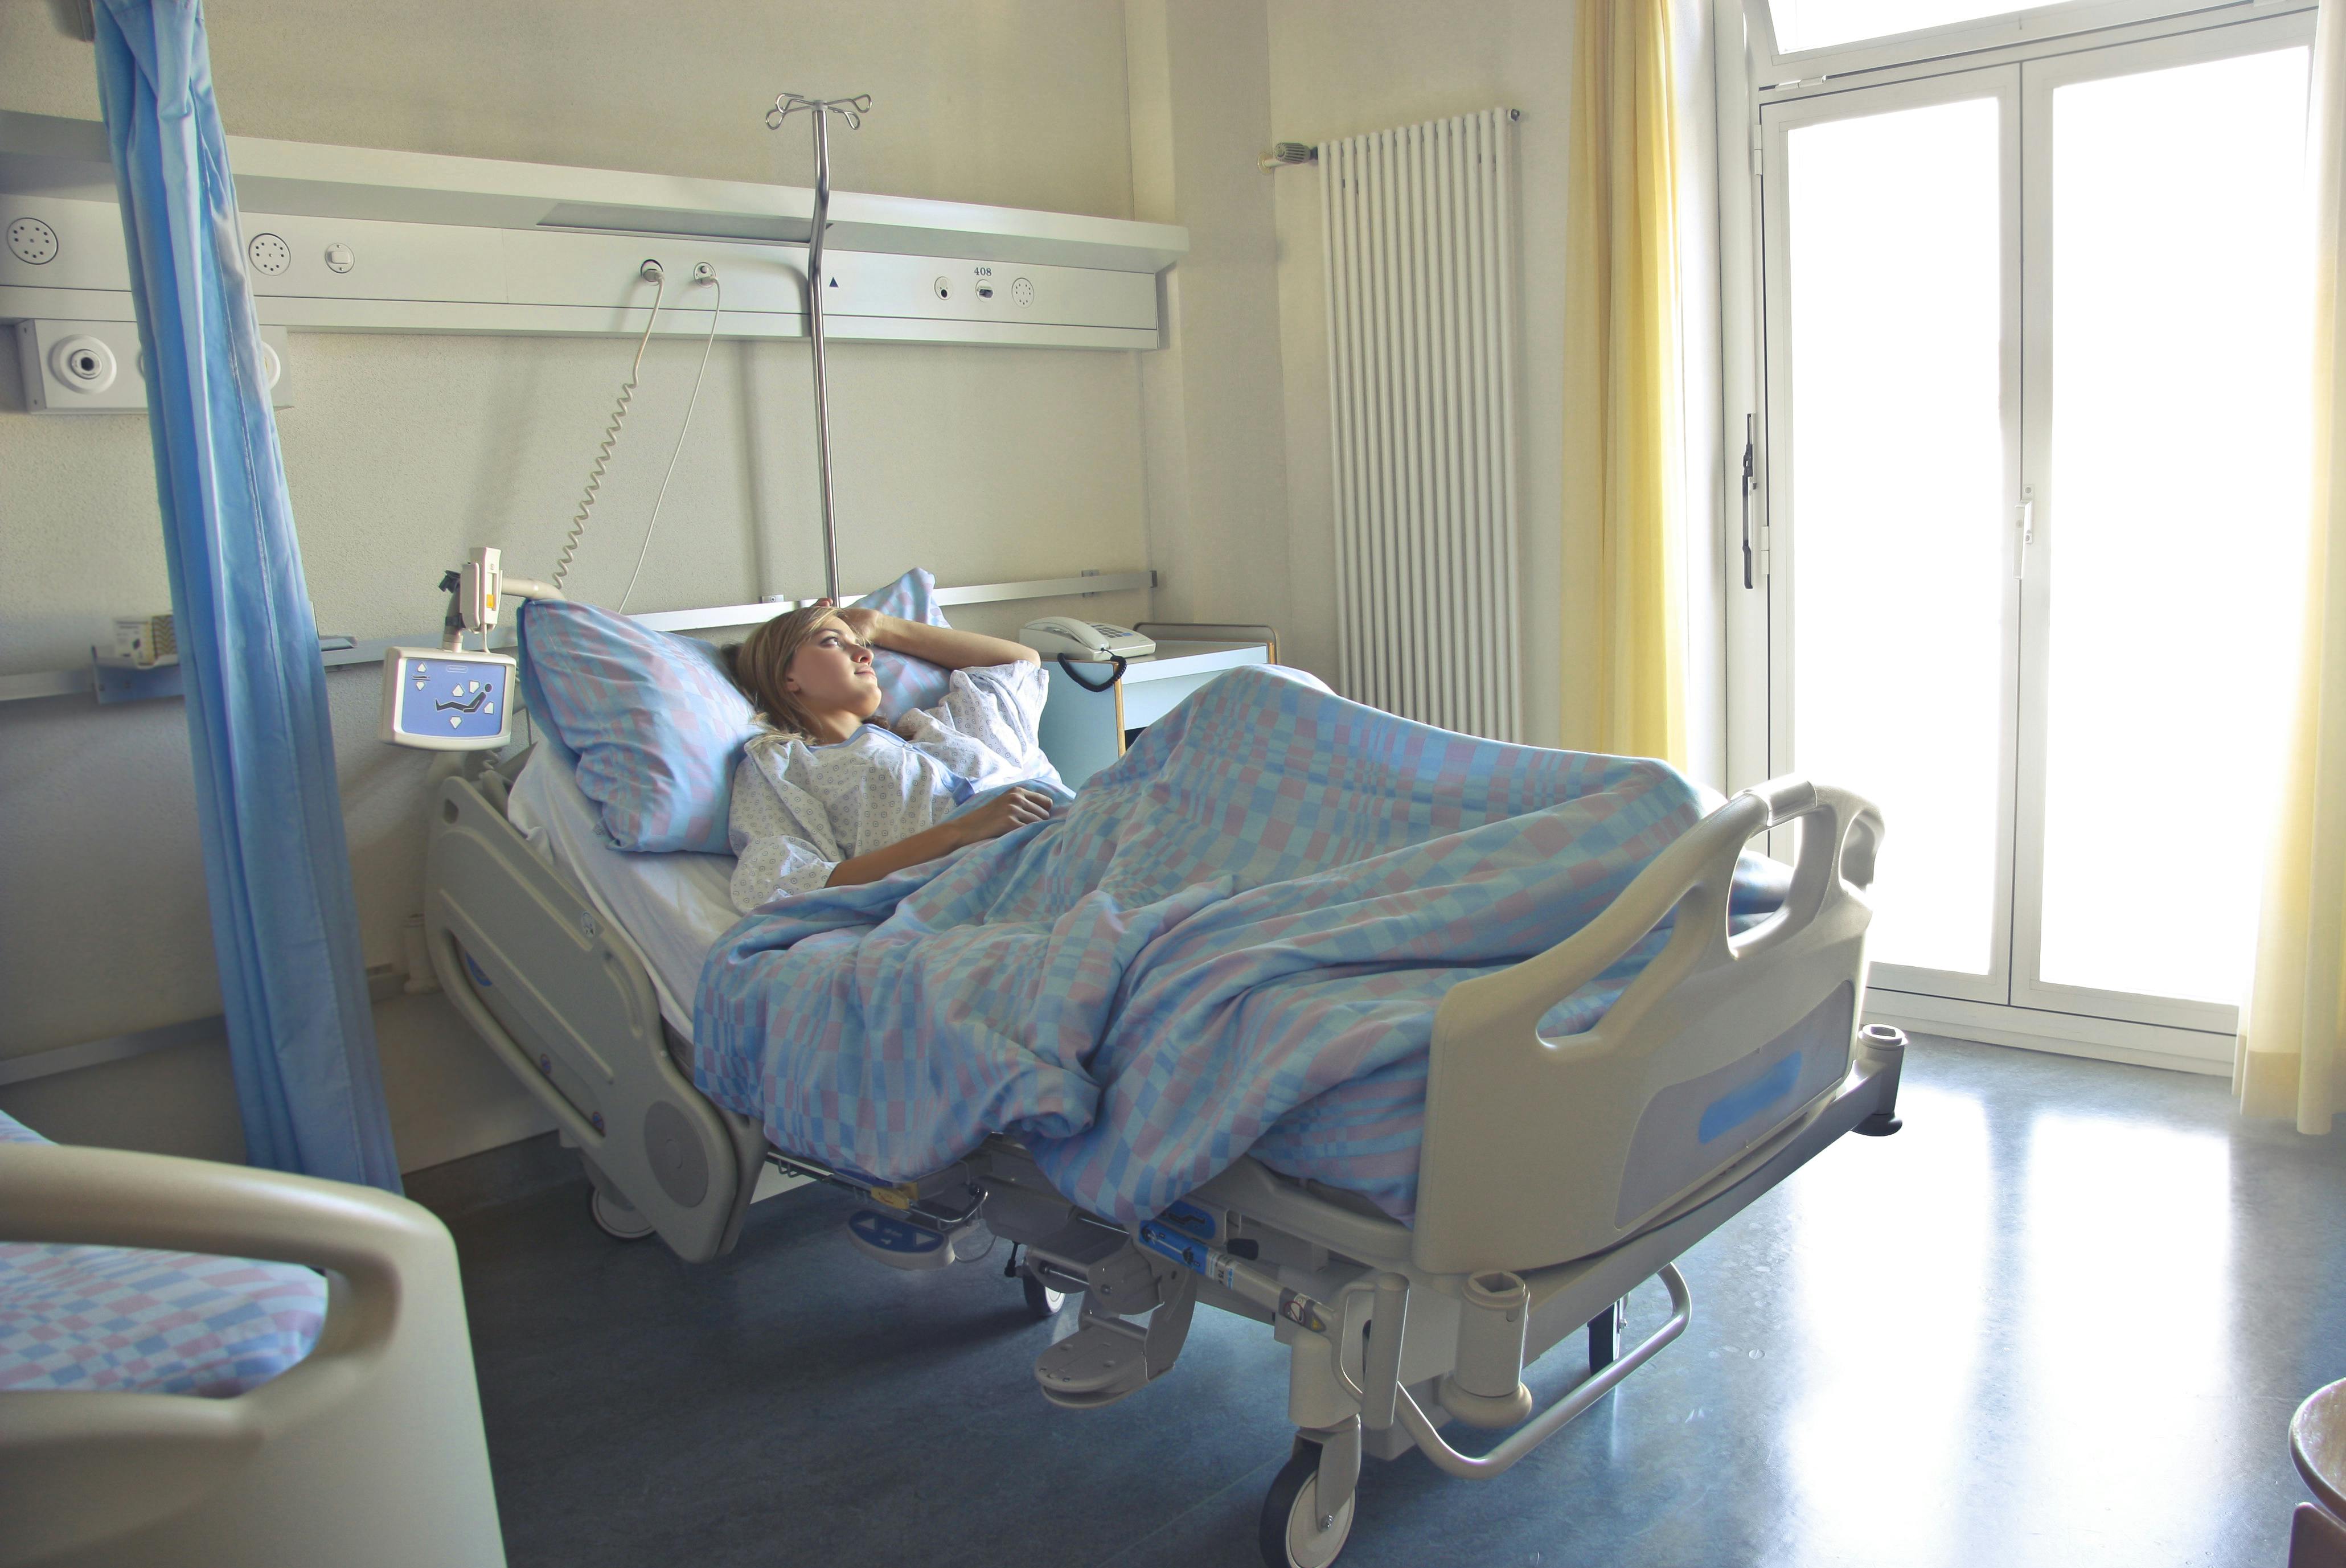 A woman on a hospital bed | Source: Pexels